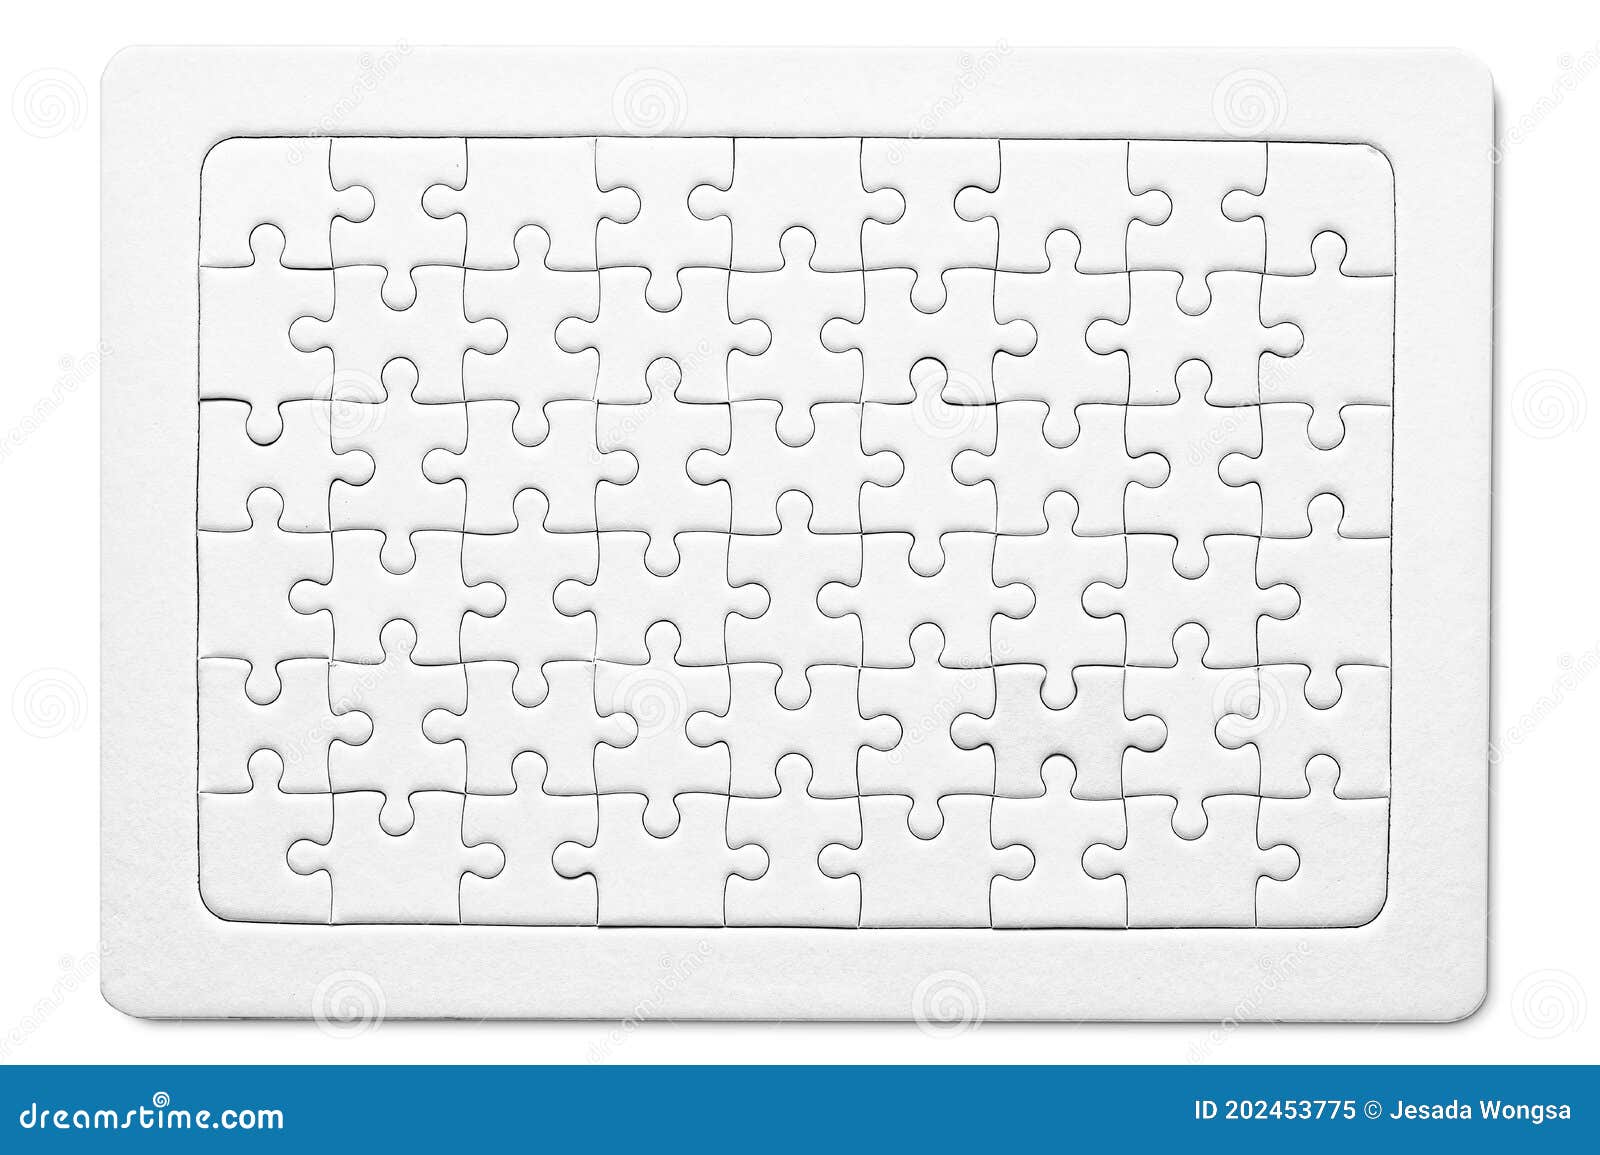 empty white paper jigsaw puzzles success mosaic solution mockup for printable puzzle pieces grid design template isolate stock image image of design colour 202453775